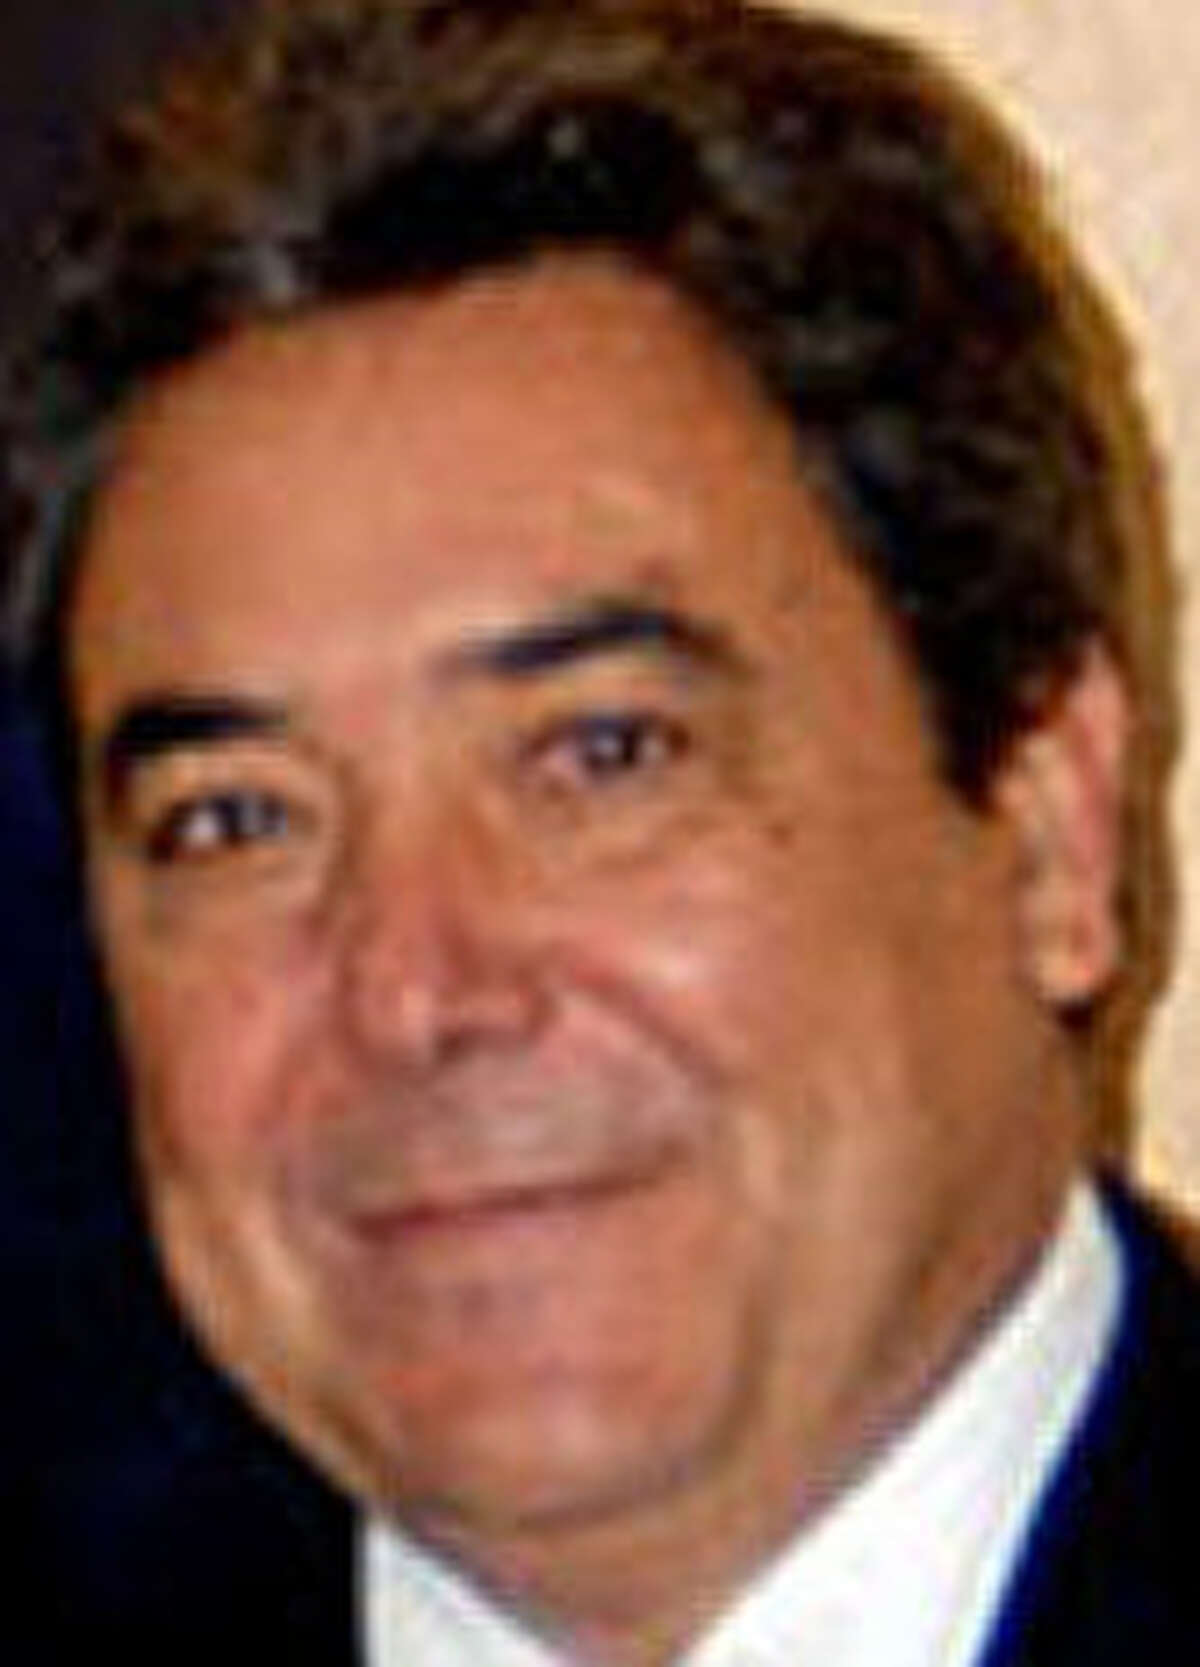 Jorge Juan Torres Lopez is the former governor of Coahuila.